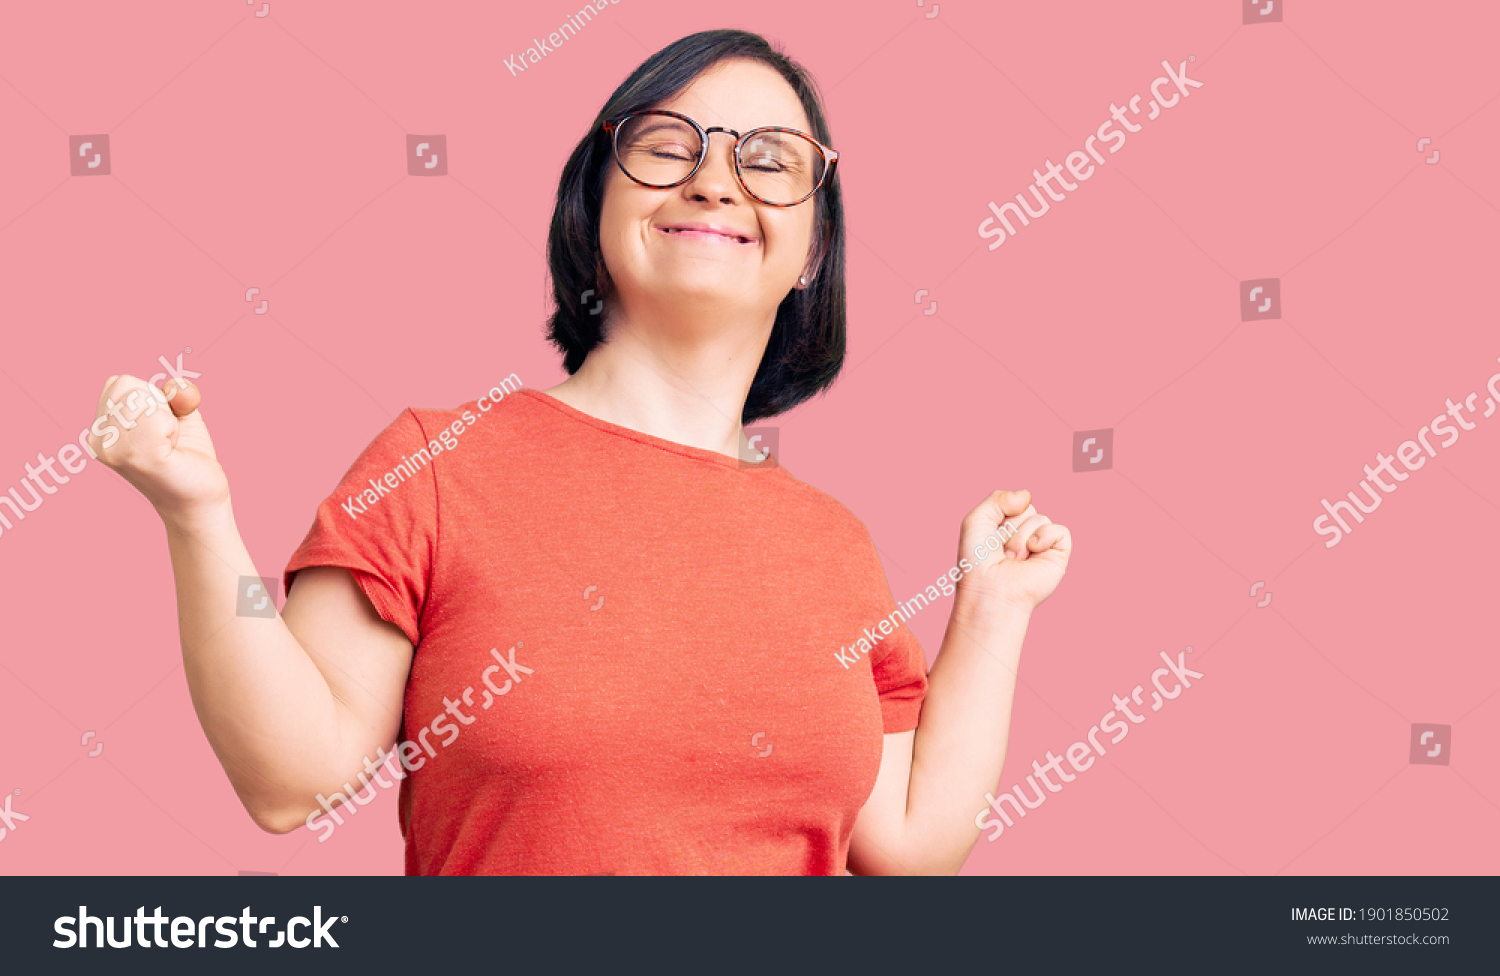 Brunette woman with down syndrome wearing casual clothes and glasses very happy and excited doing winner gesture with arms raised, smiling and screaming for success. celebration concept.  #1901850502